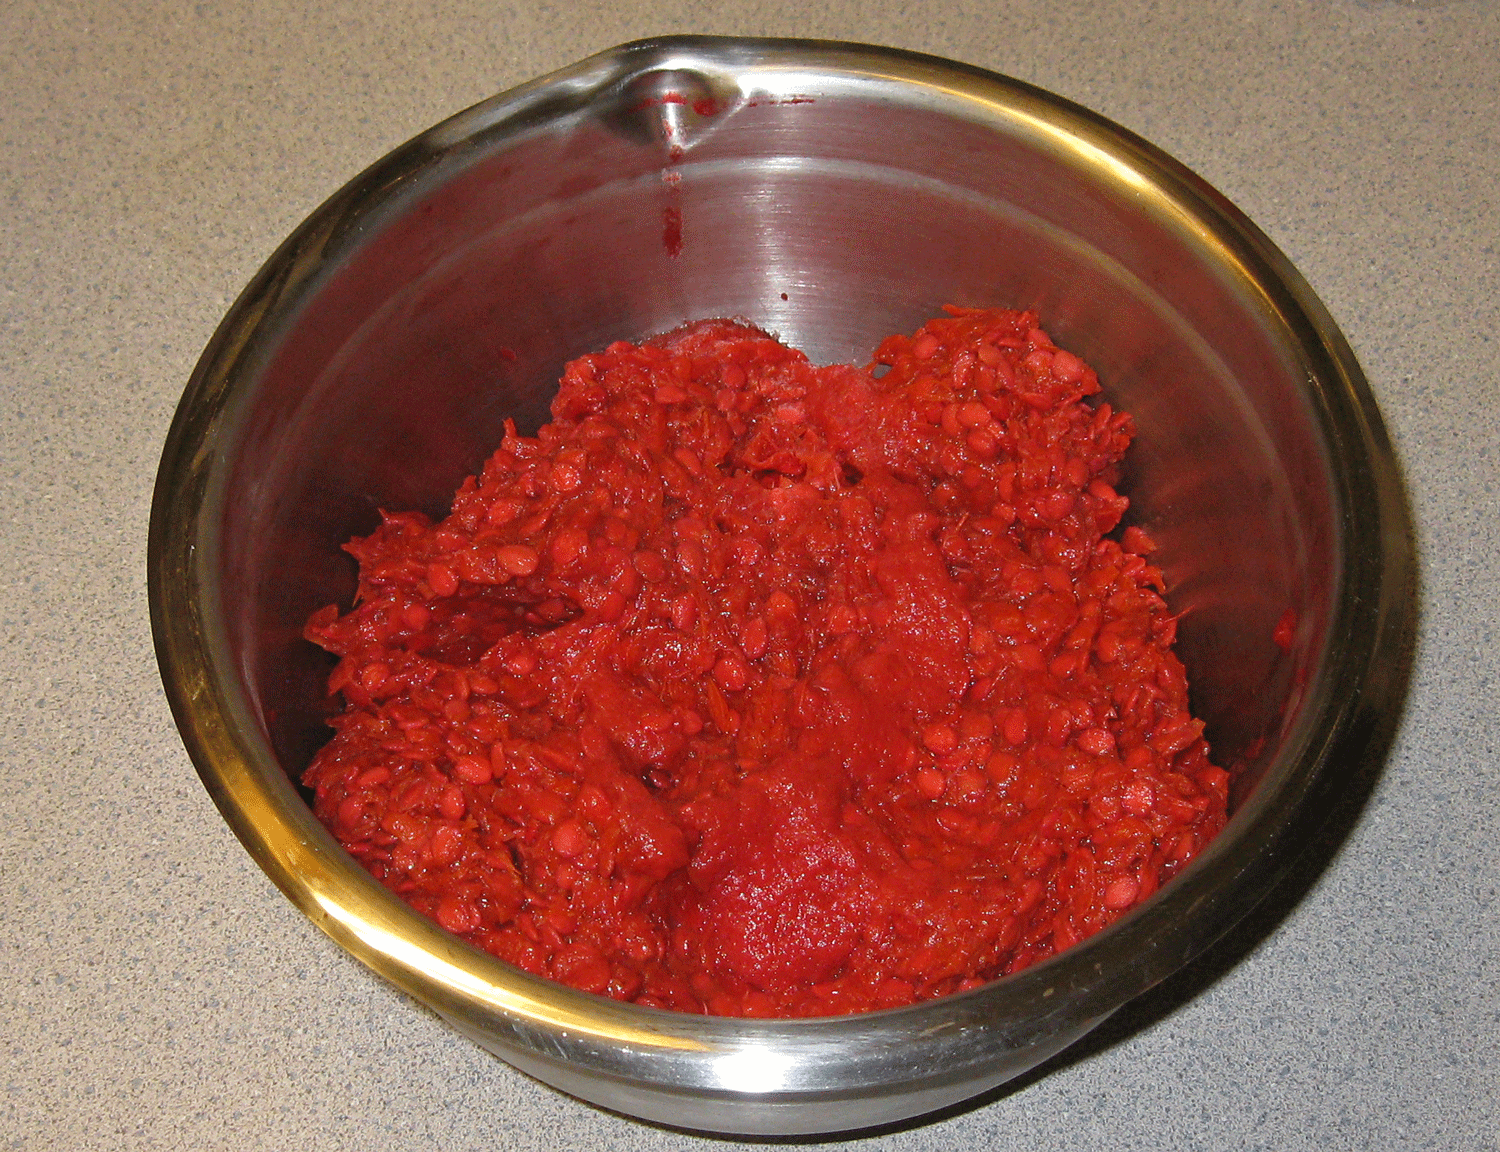 Leftover seed mash from making highbush cranberry ketchup.